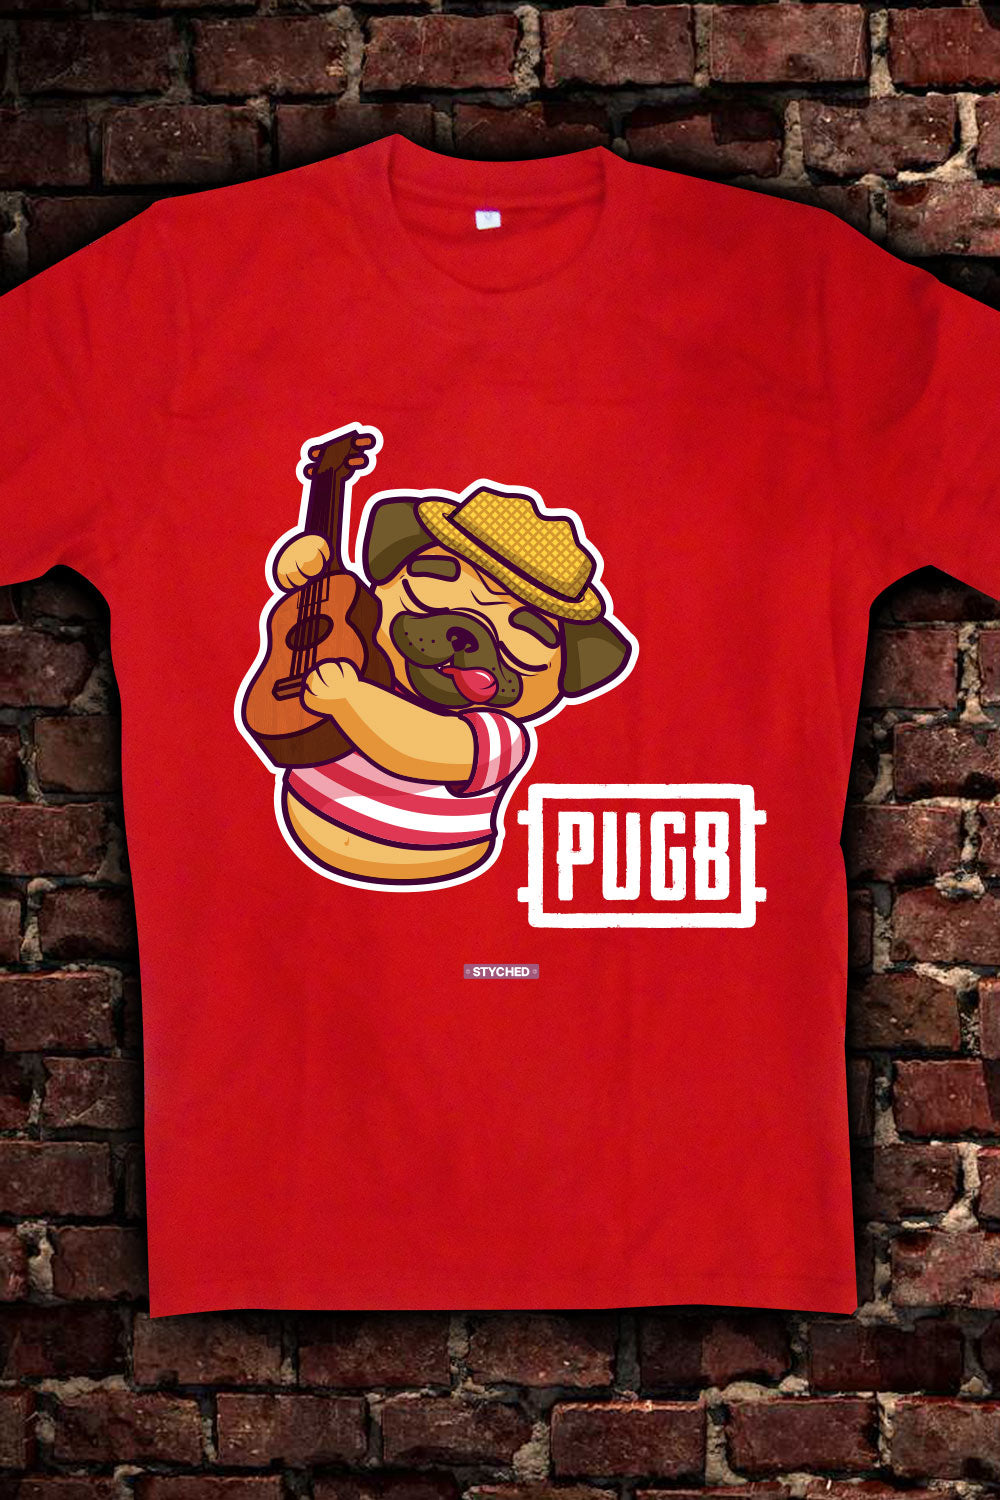 Pugb following PubG style - Quirky Graphic T-Shirt Red Color